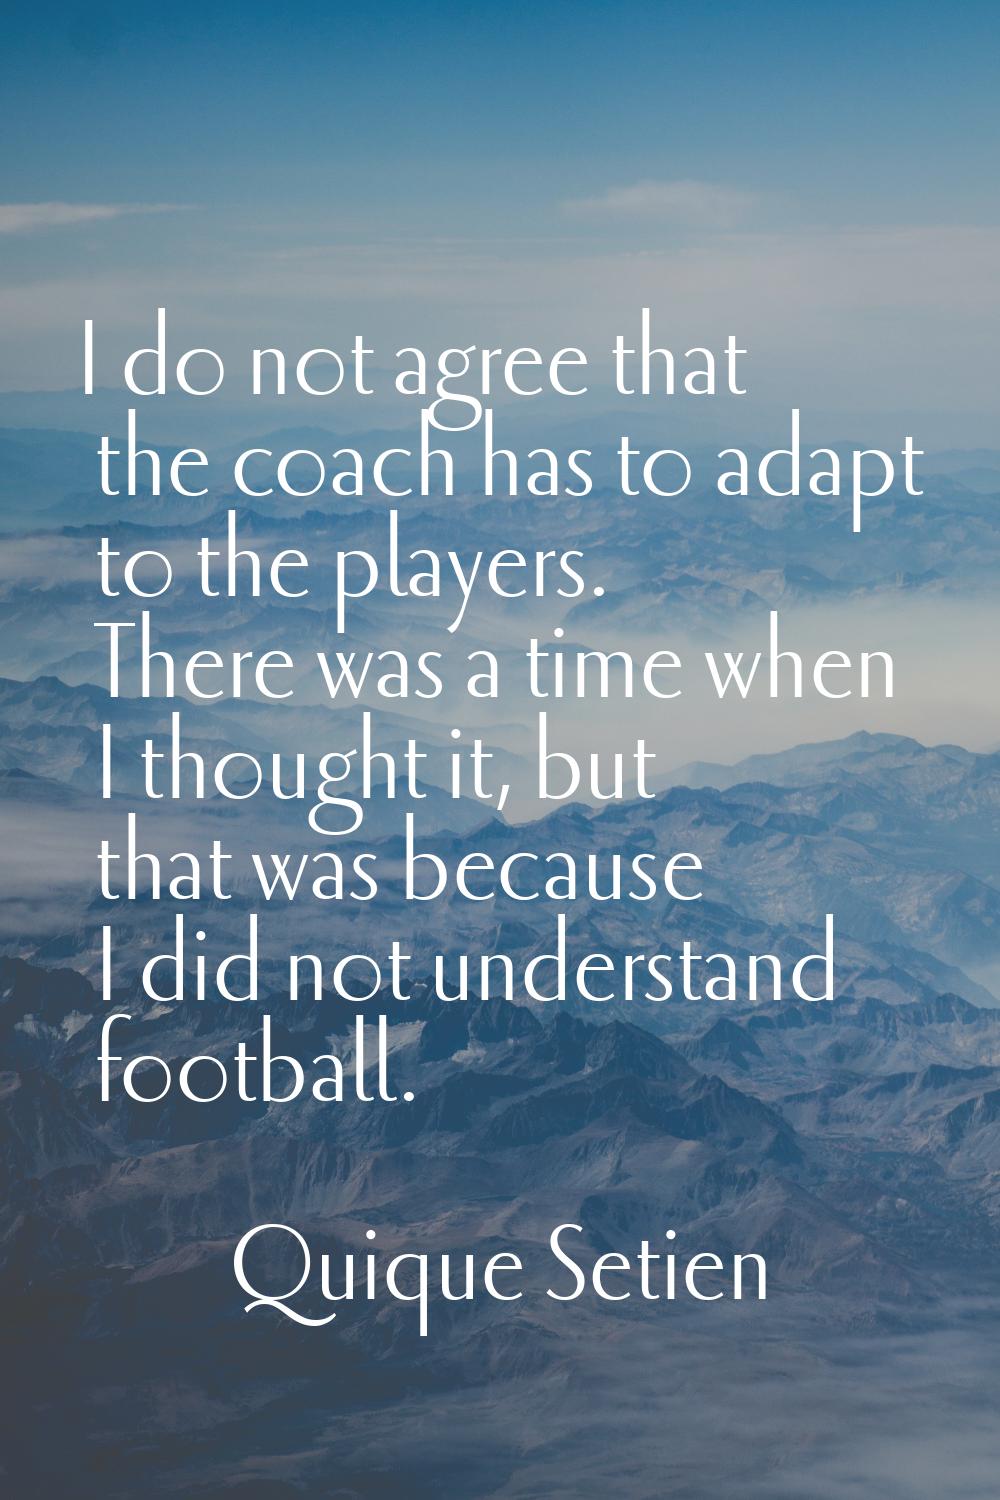 I do not agree that the coach has to adapt to the players. There was a time when I thought it, but 